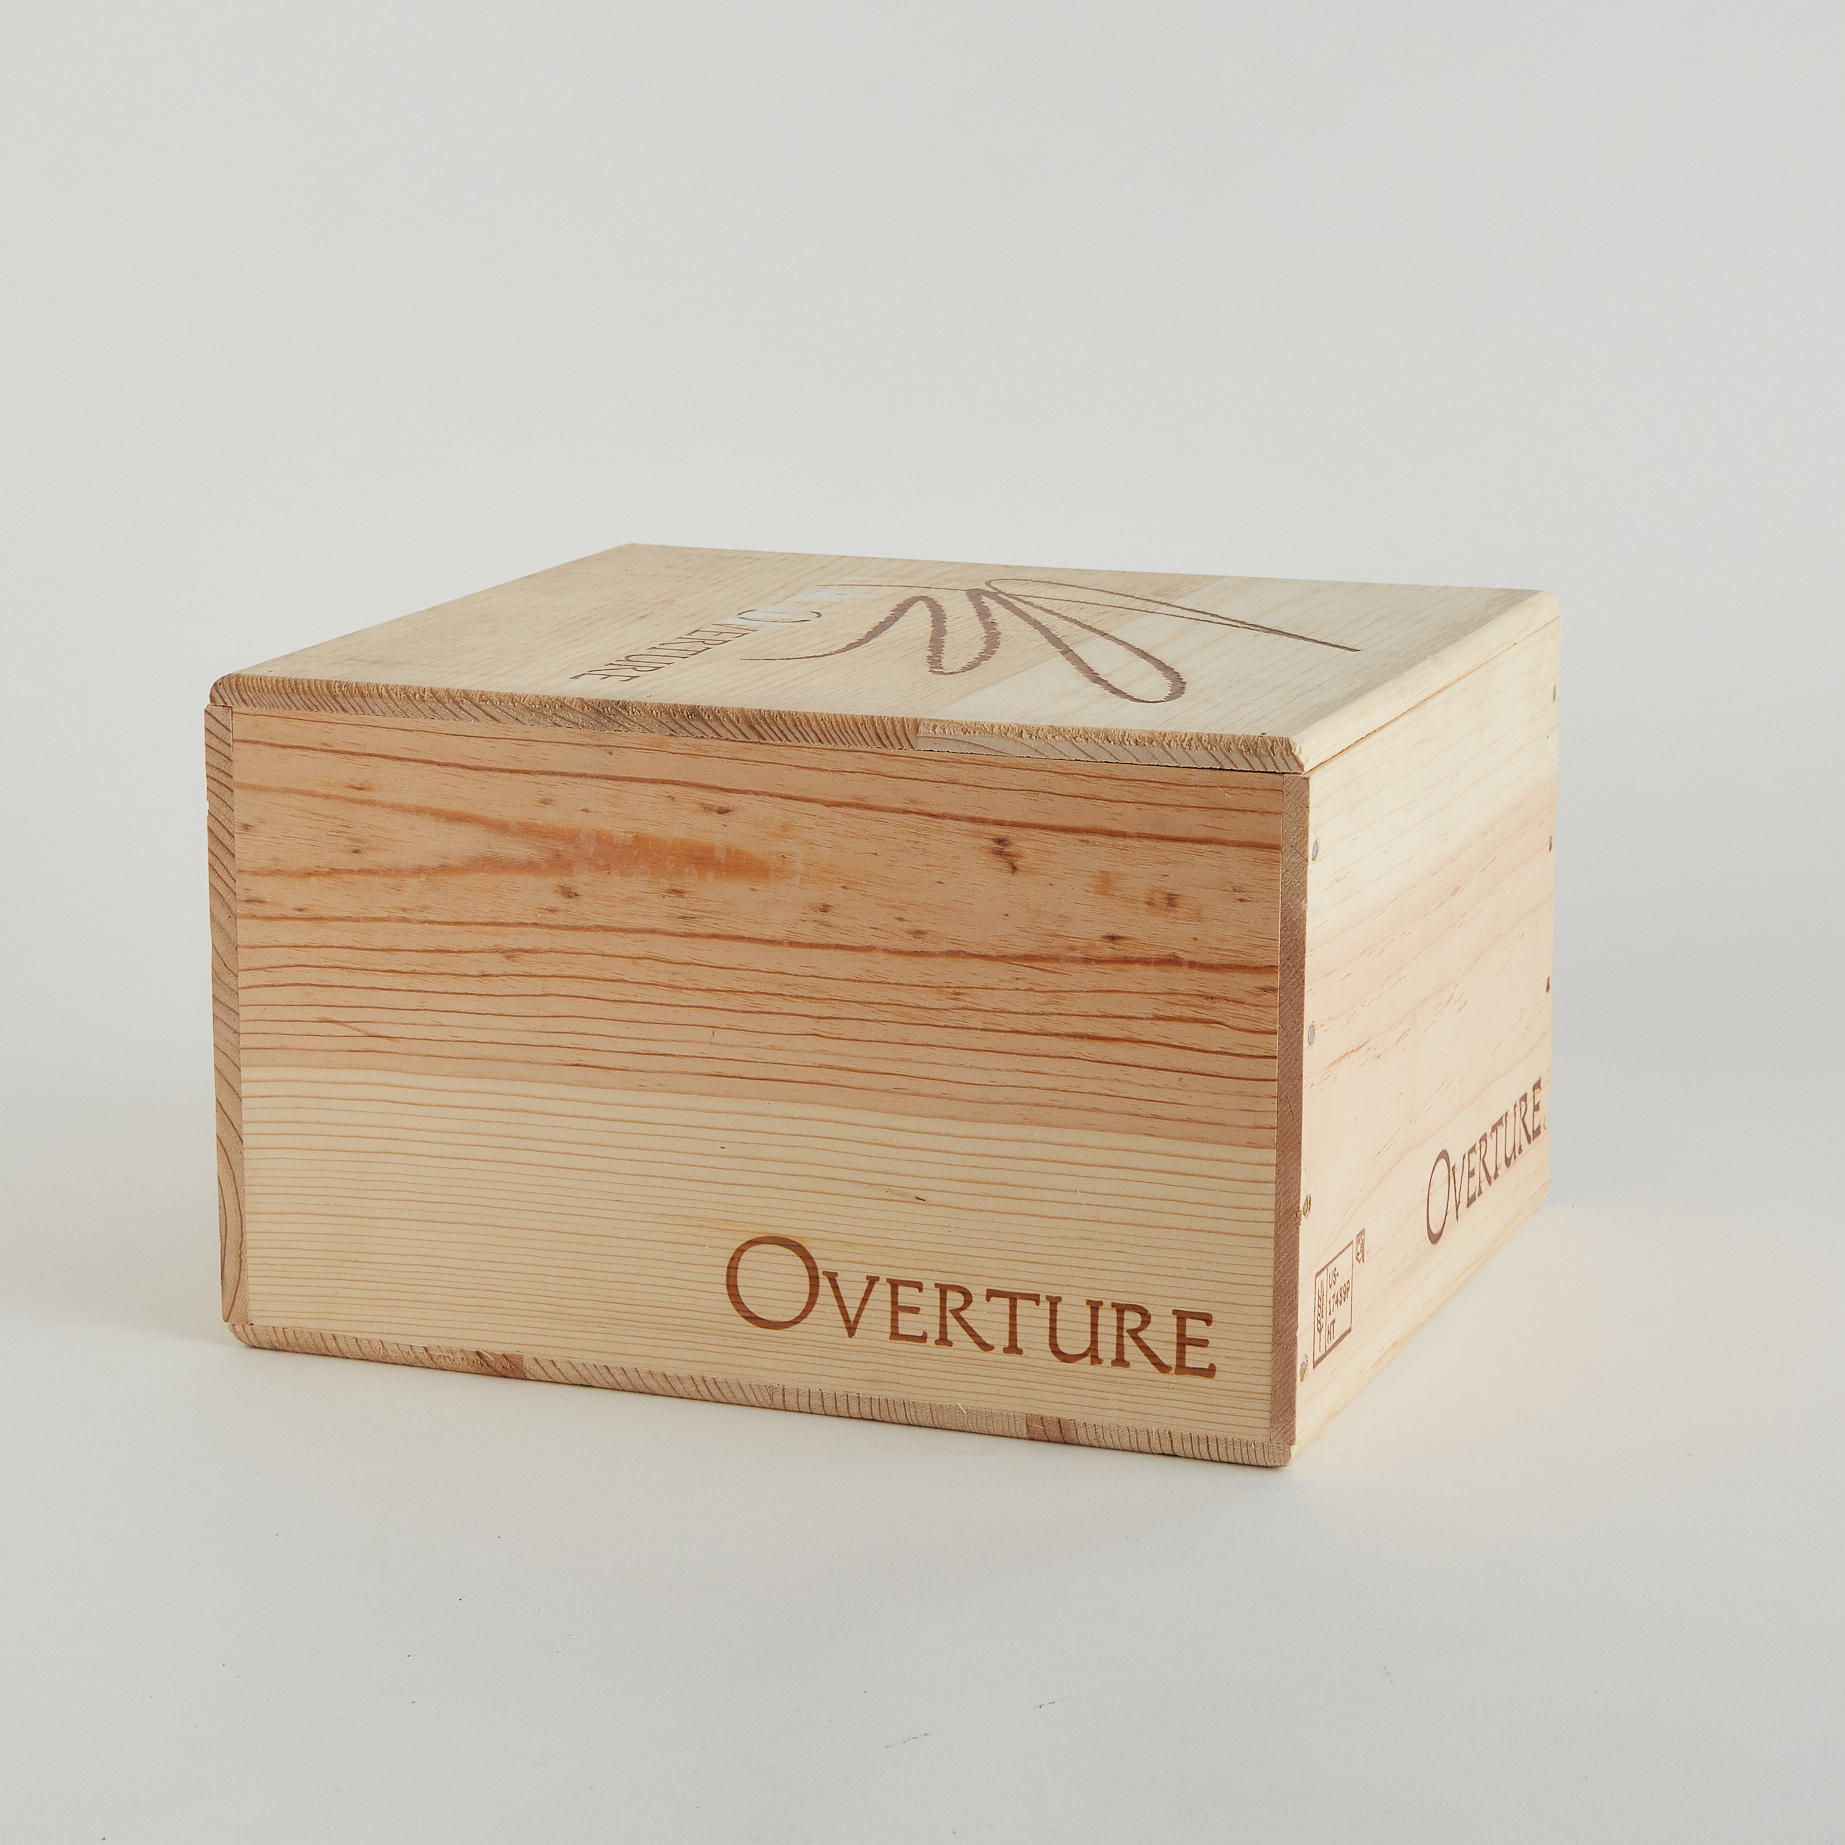 OPUS ONE OVERTURE NV (6, OWC)